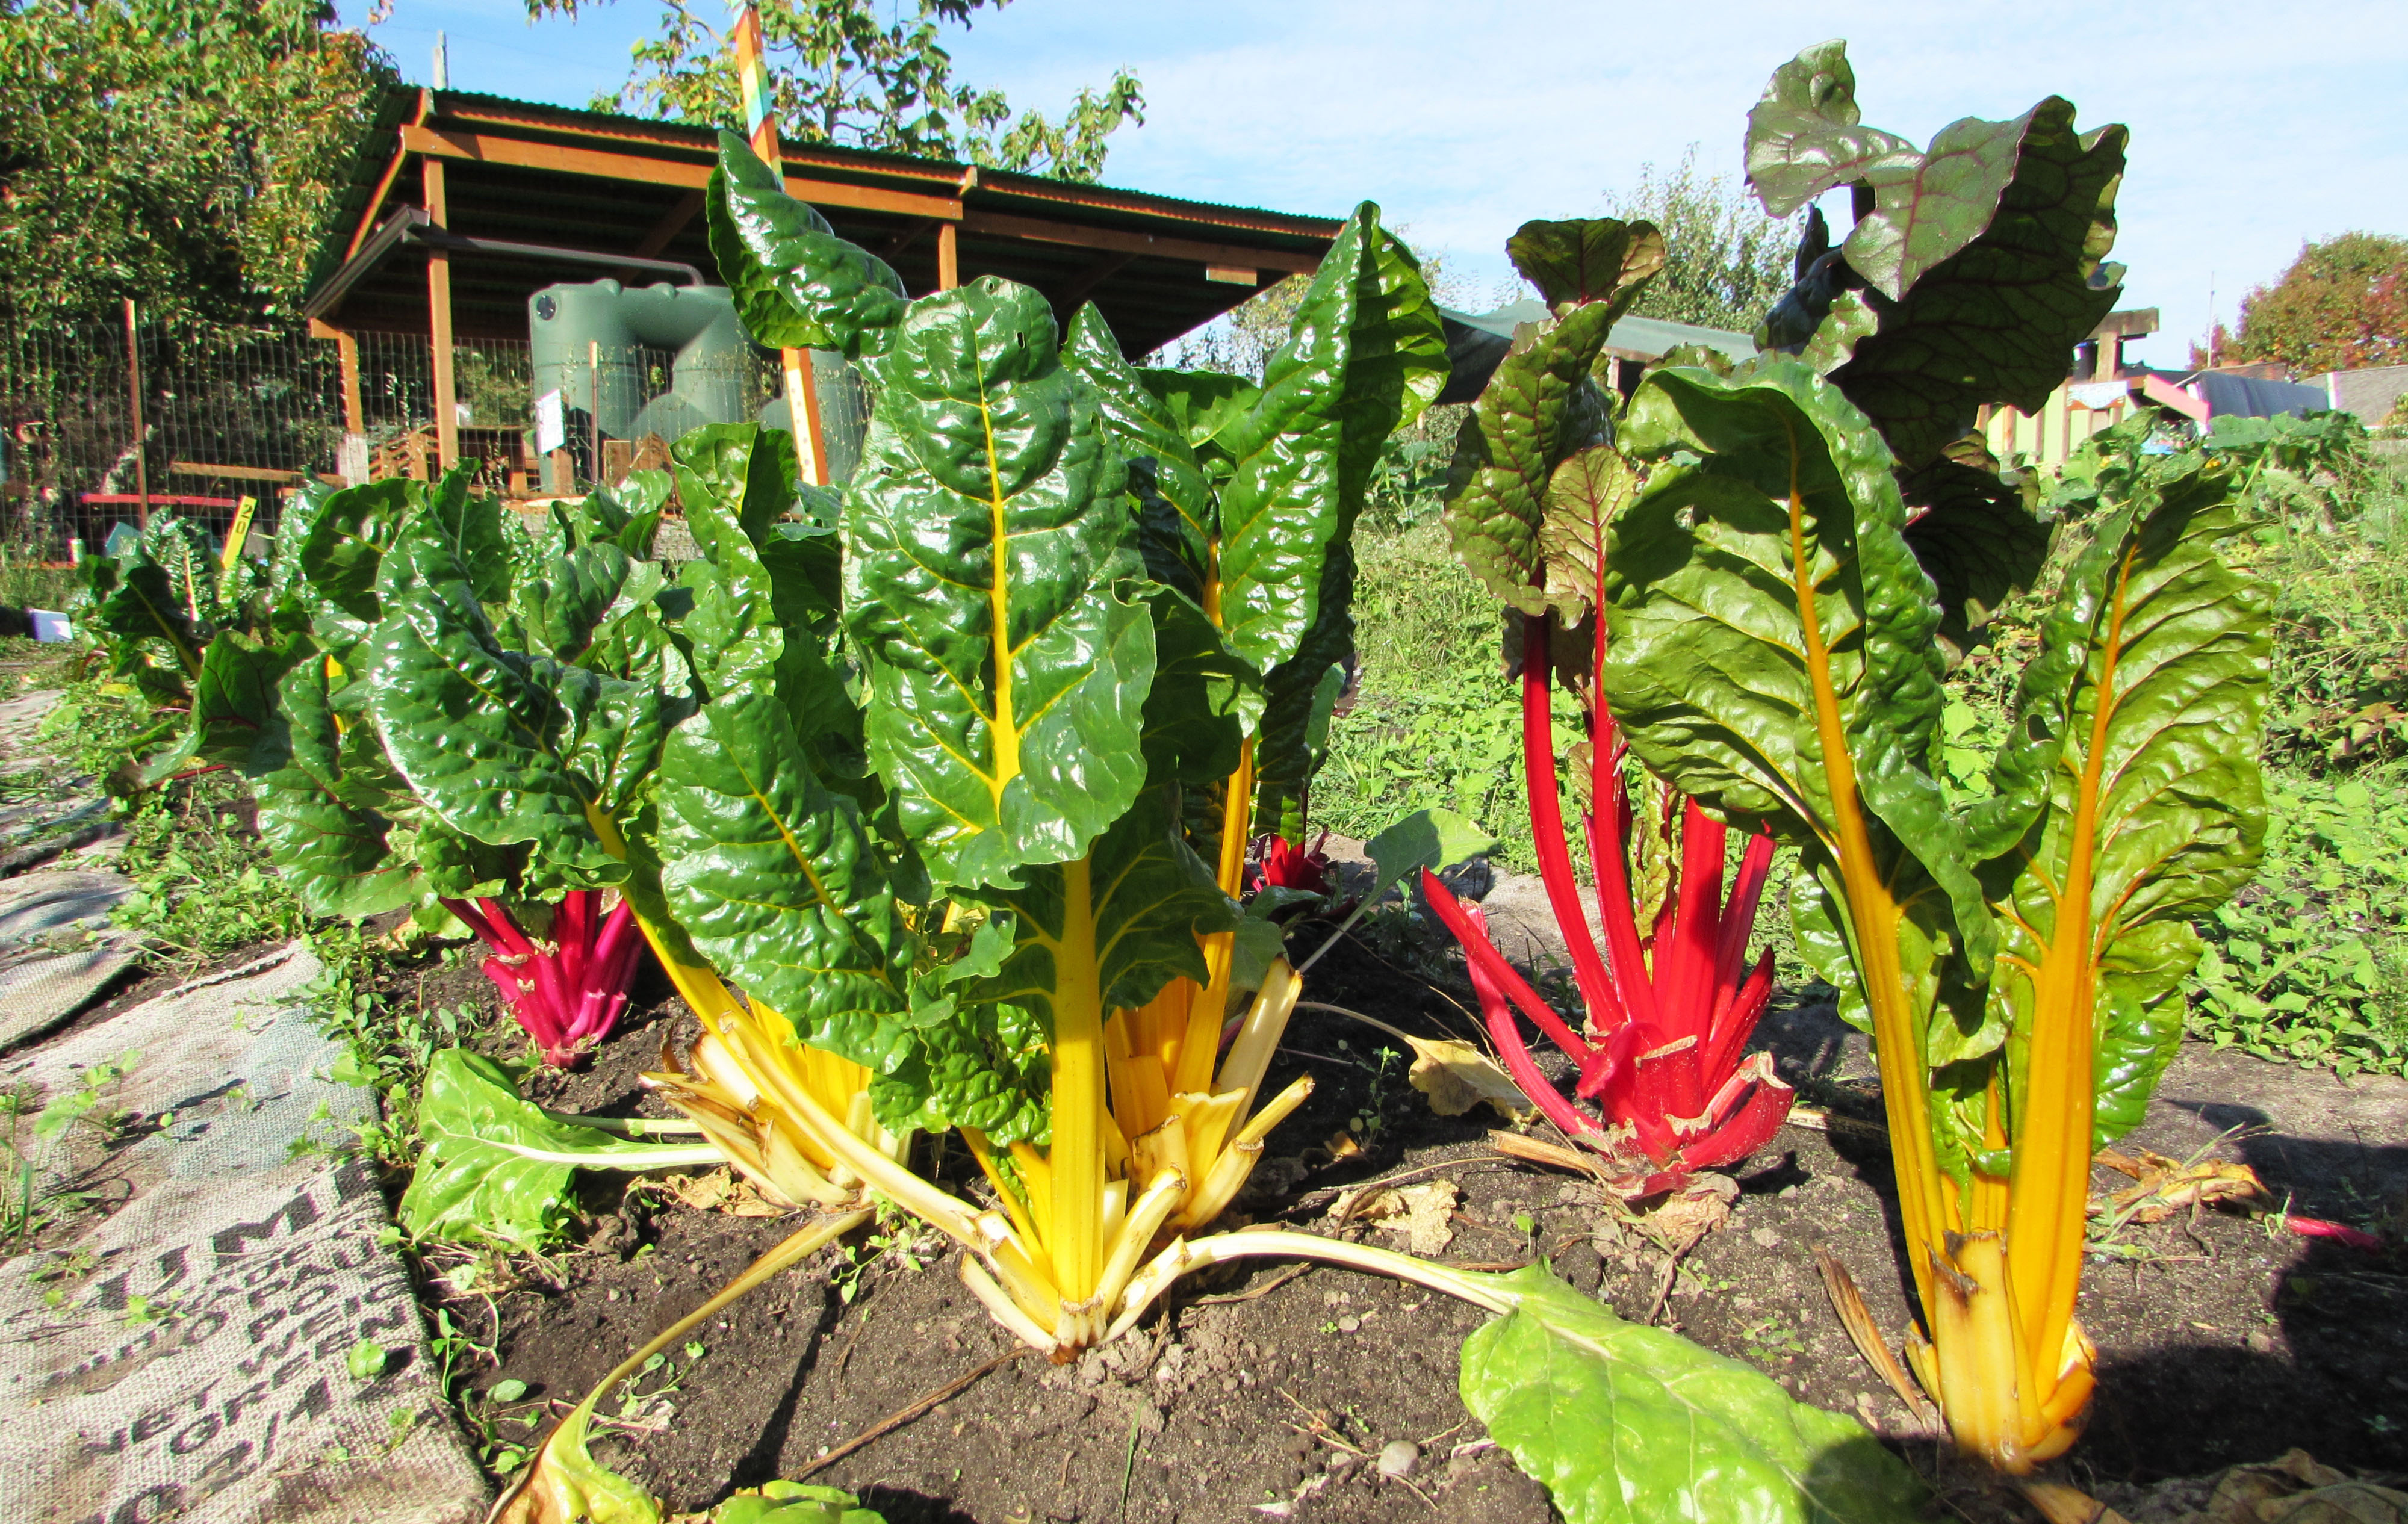 The many colors of Swiss chard